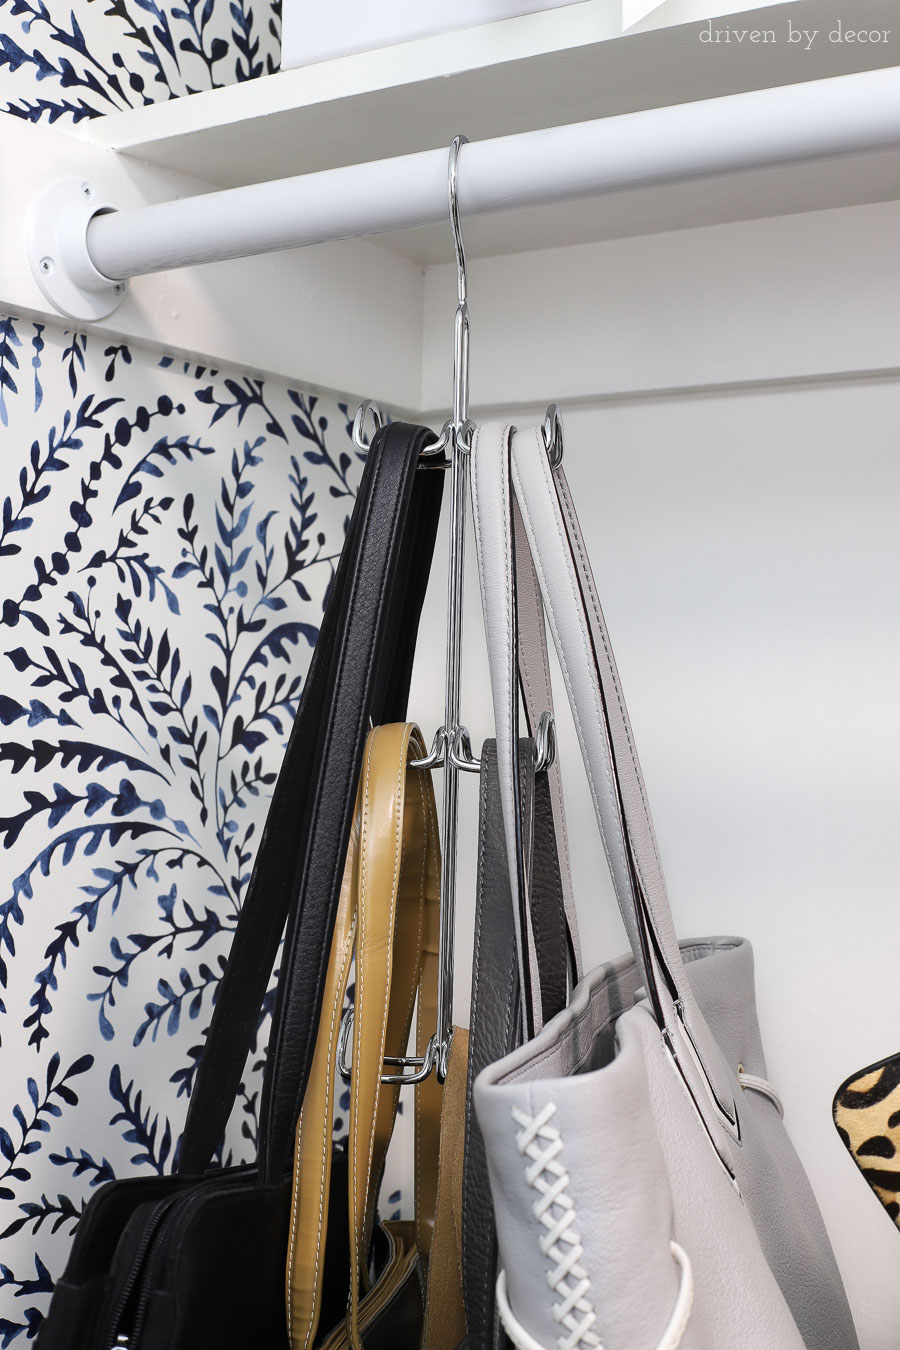 I need one of these hanging organizers to organize my purses and totes in my closet!